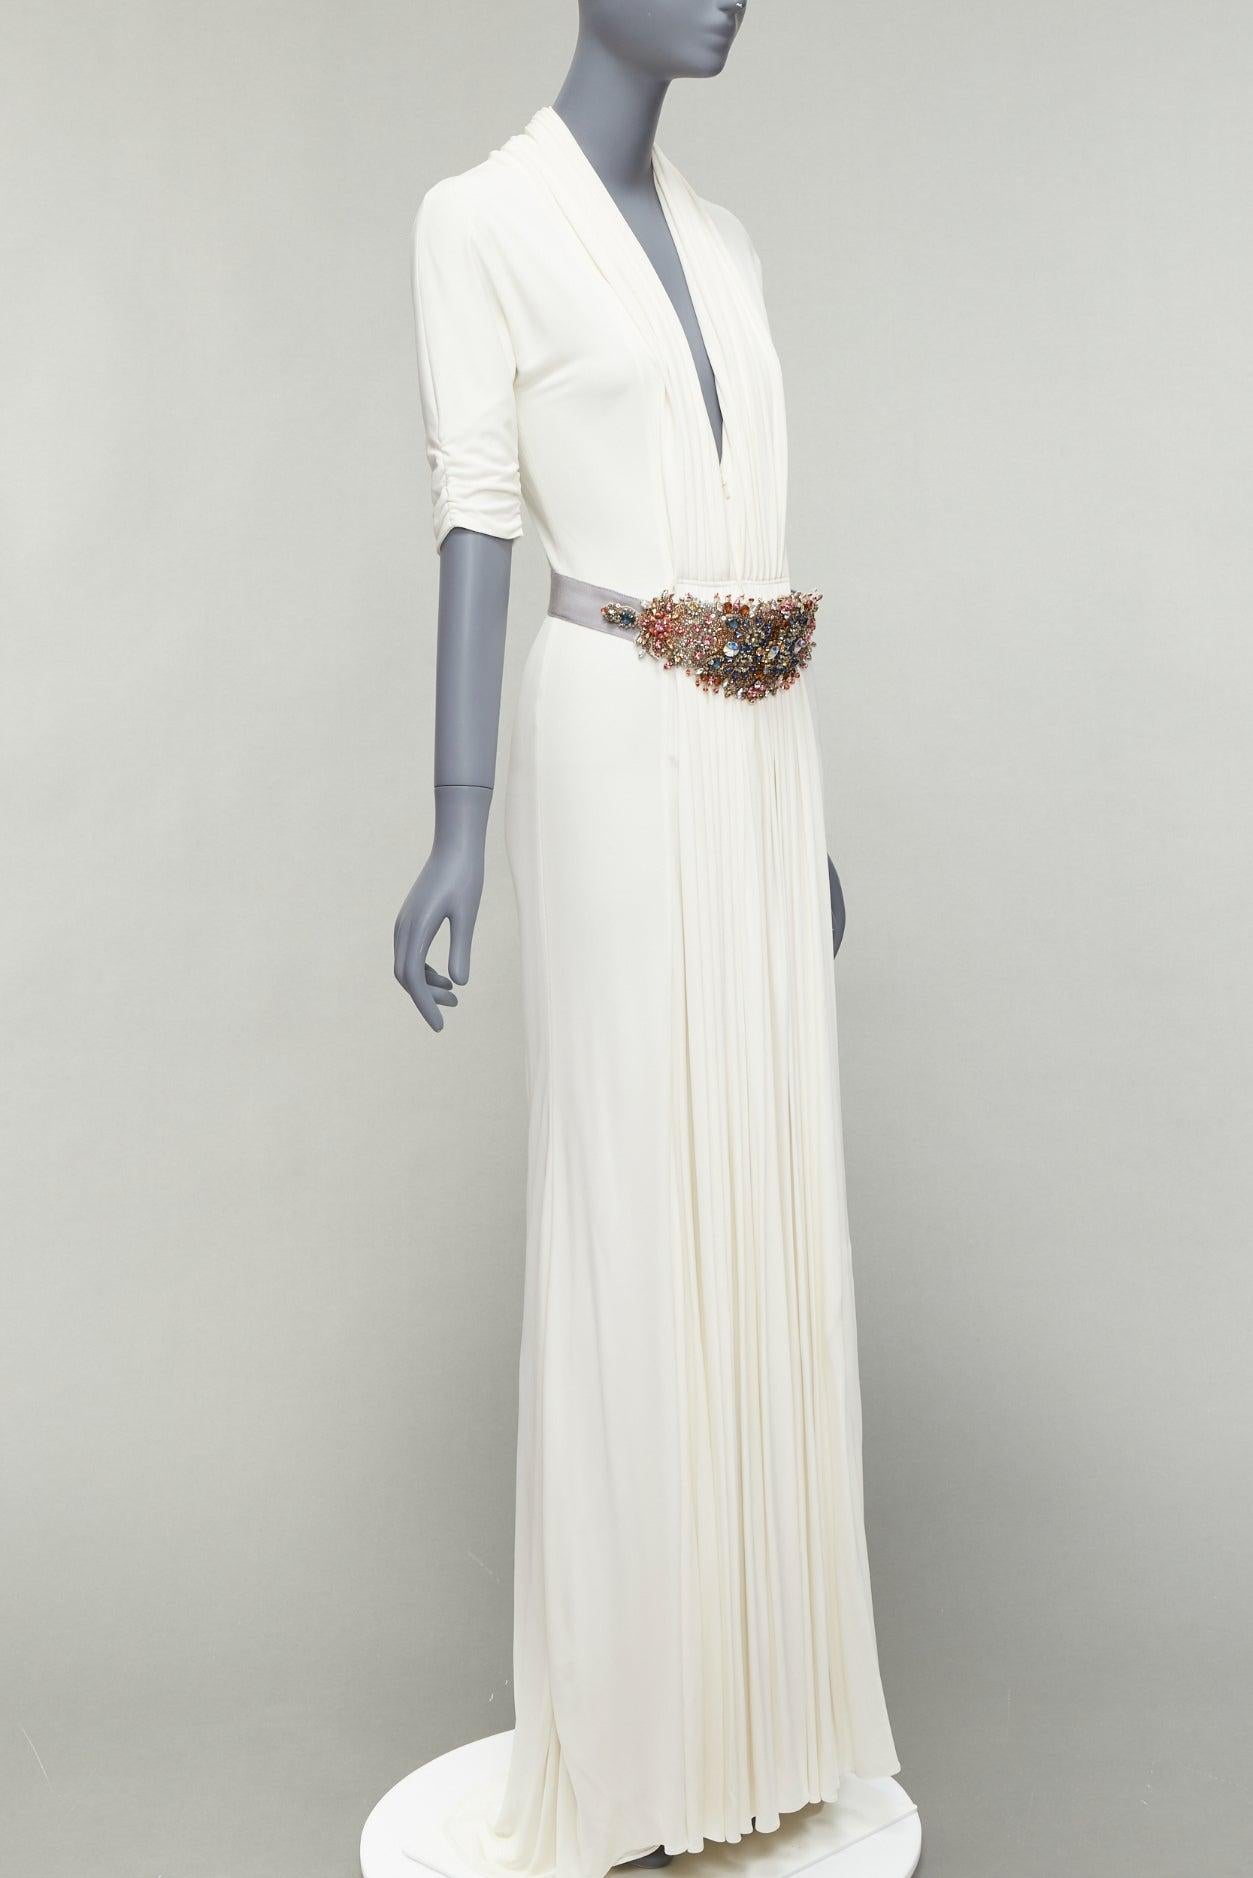 REEM ACRA white pleated colourful jewel grey belt deep V grecian gown US2 S
Reference: NKLL/A00024
Brand: Reem Acra
Material: Rayon
Color: White, Multicolour
Pattern: Solid
Closure: Belt
Extra Details: Belt is removable. Fully lined.
Made in: United